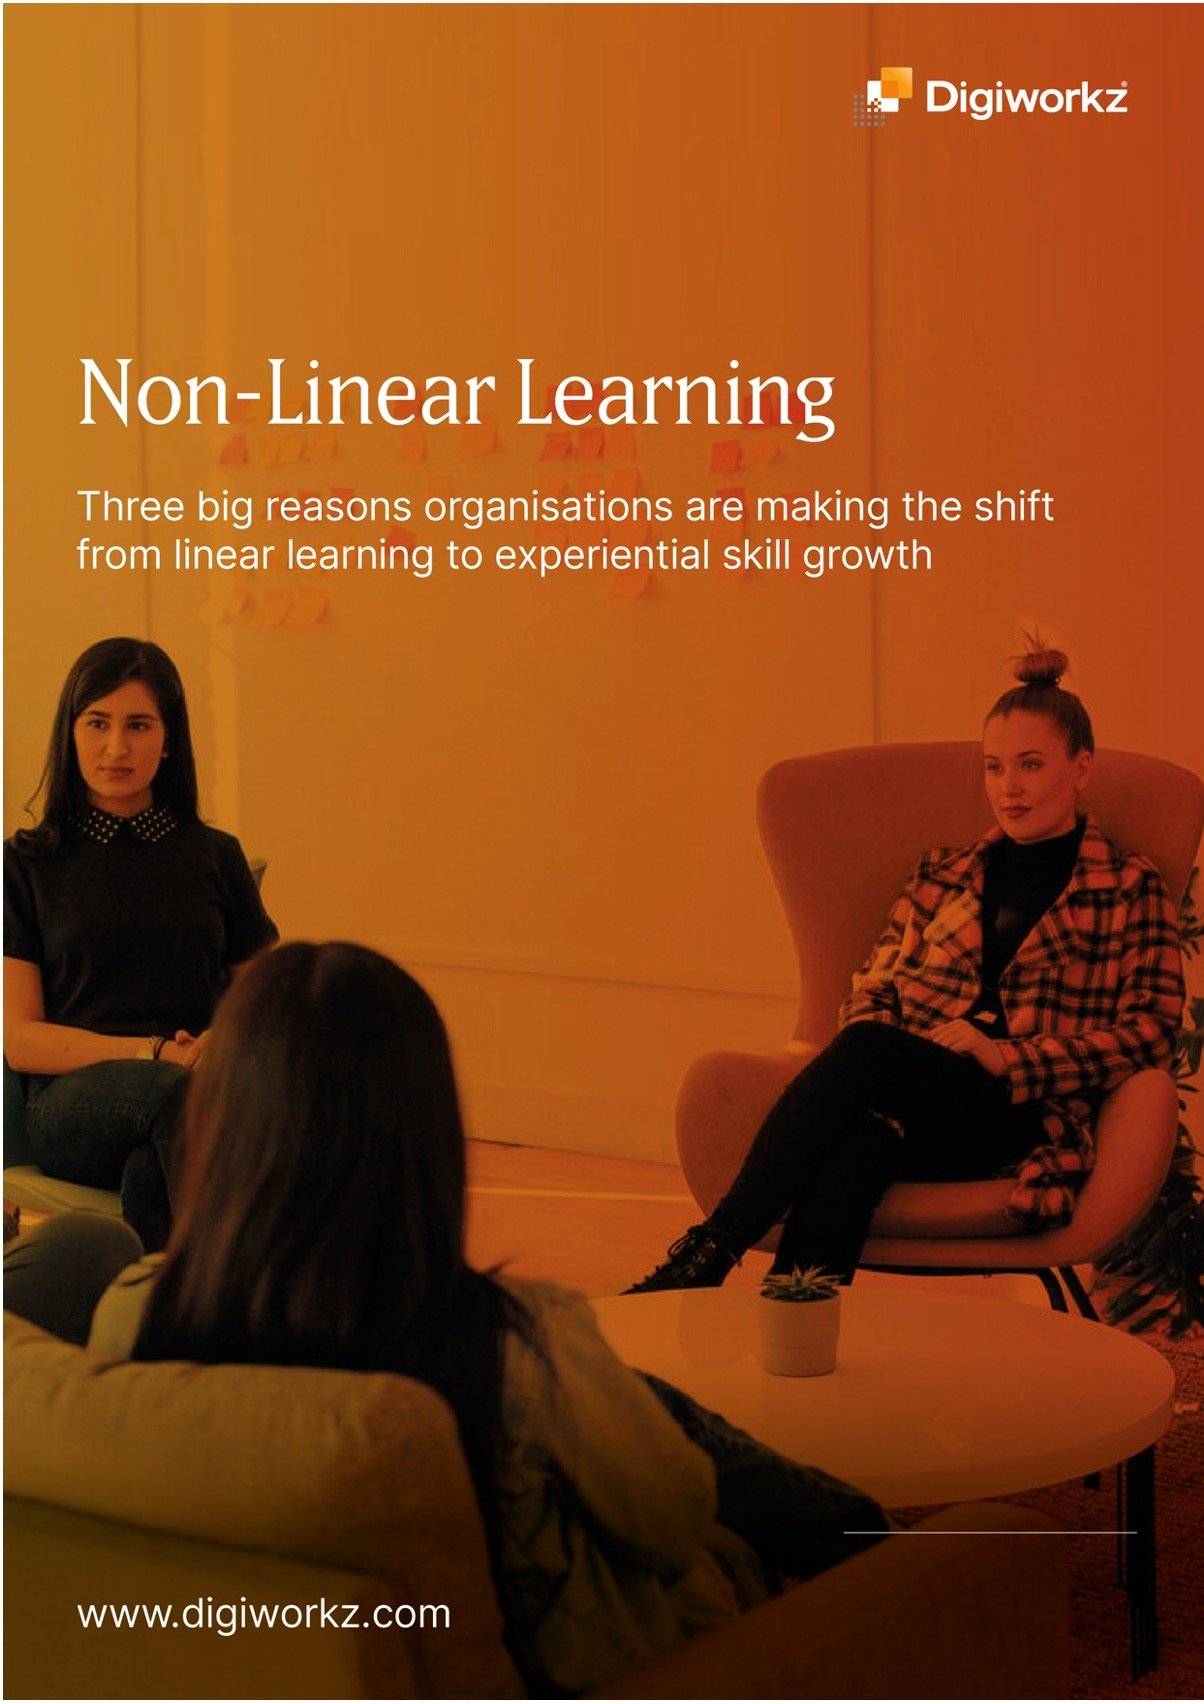 Non-linear learning: Coming soon